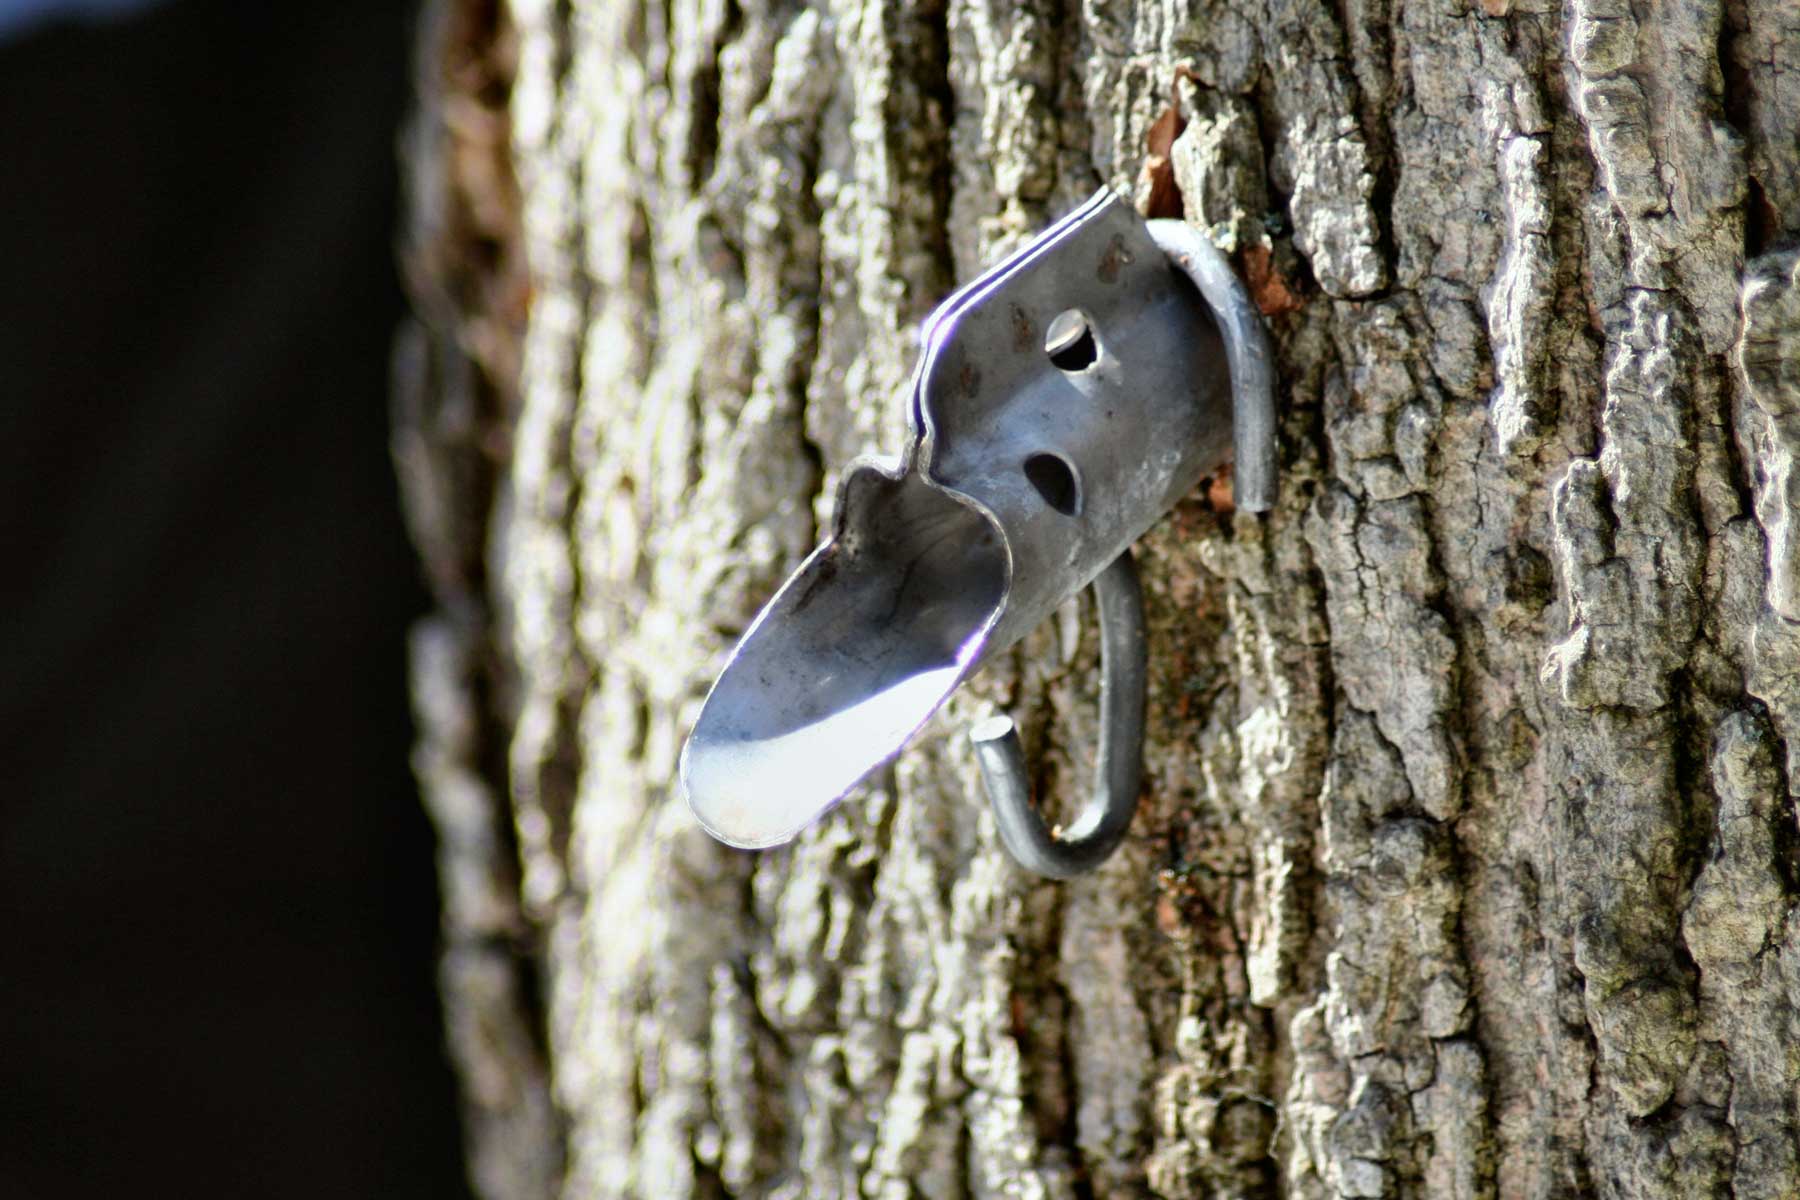 A maple syrup tap